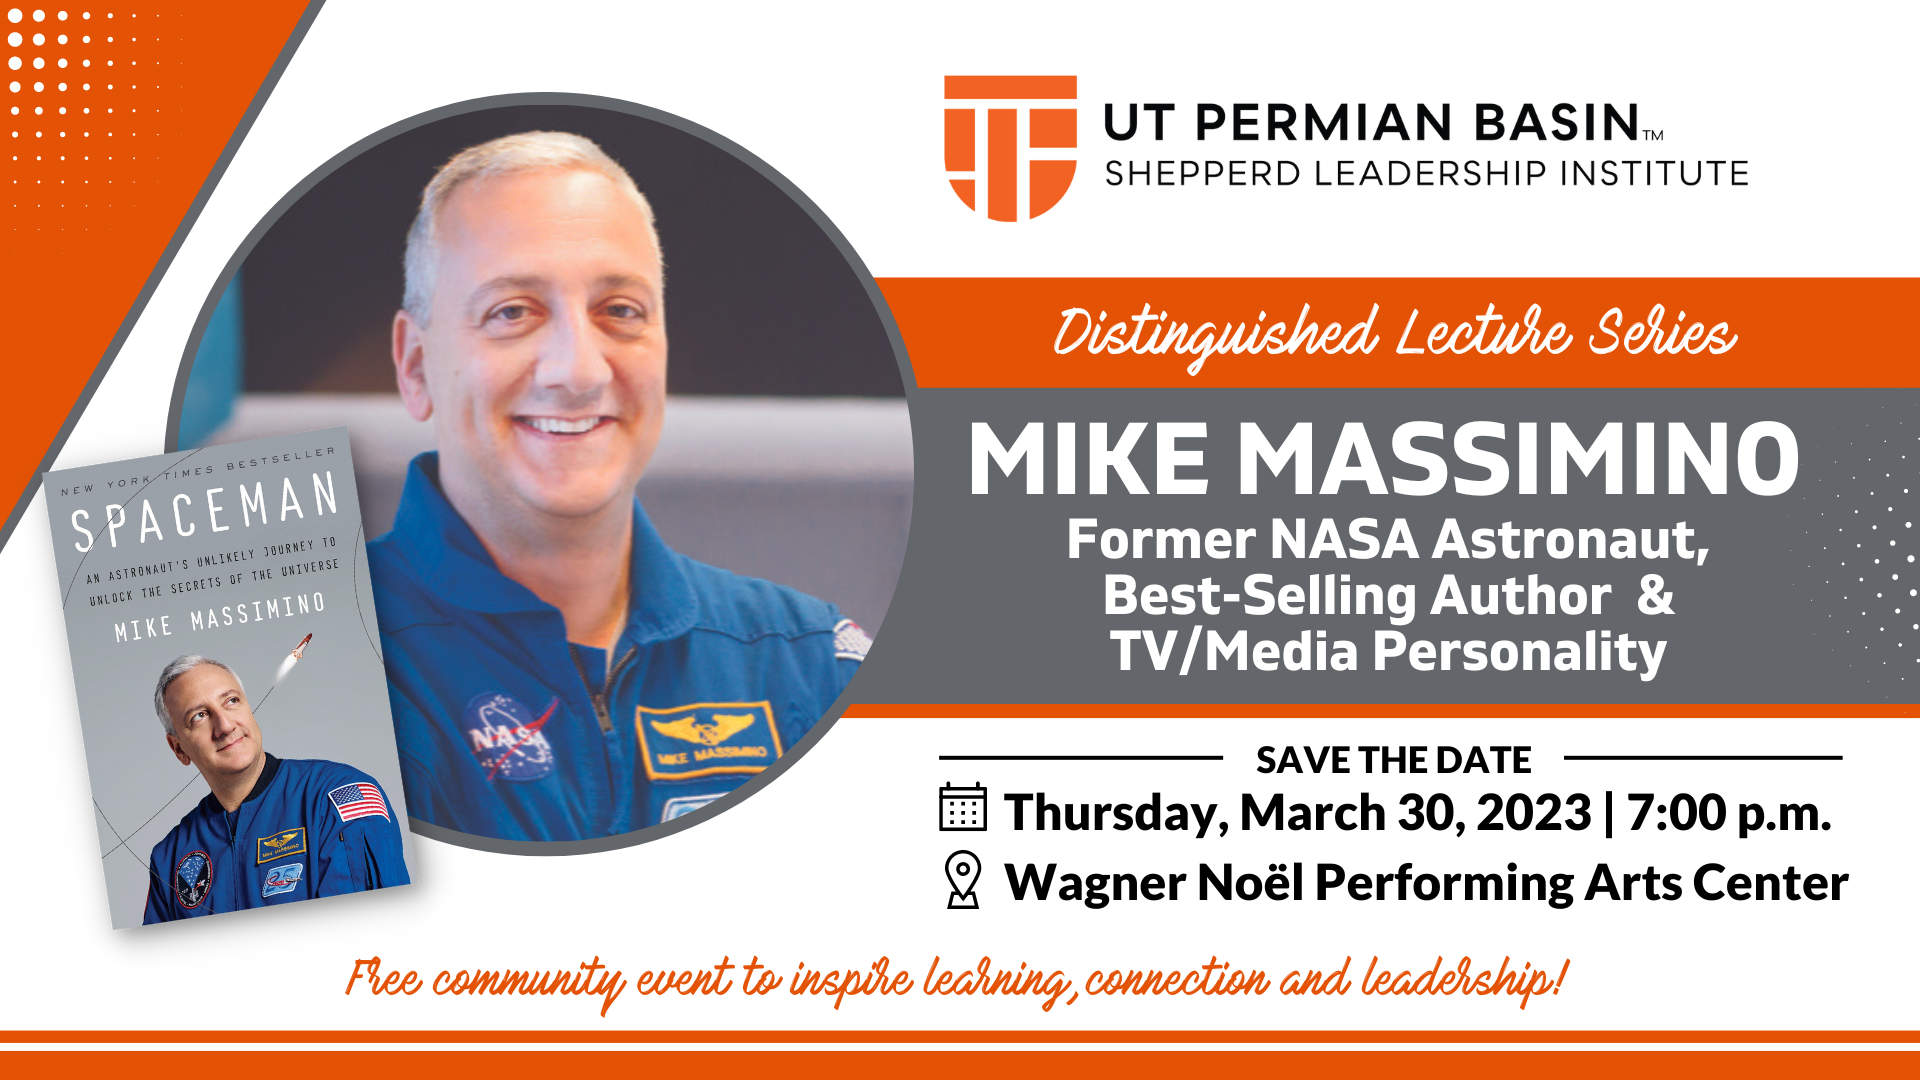 mike-massimino-distinguished-lecture-save-the-date-presenation.png